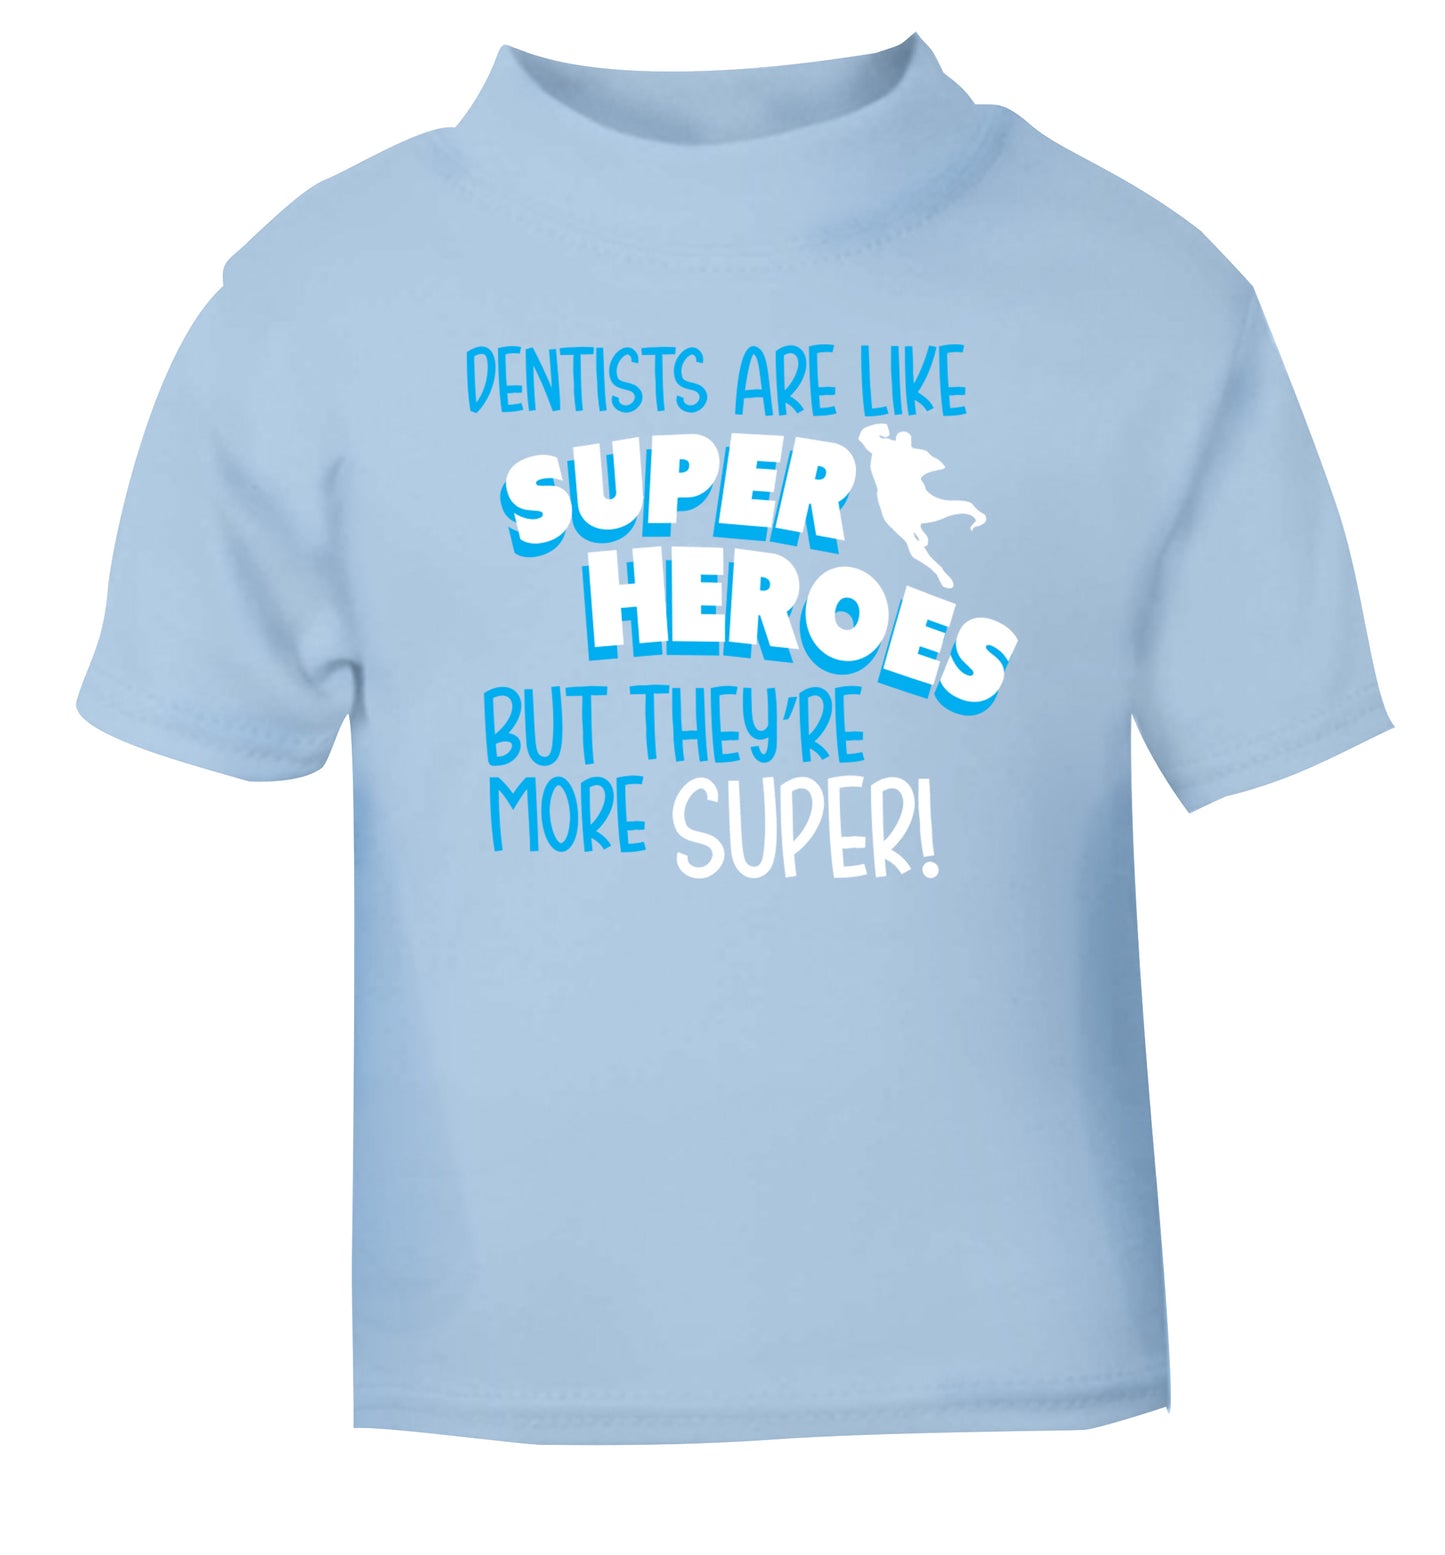 Dentists are like superheros but they're more super light blue Baby Toddler Tshirt 2 Years